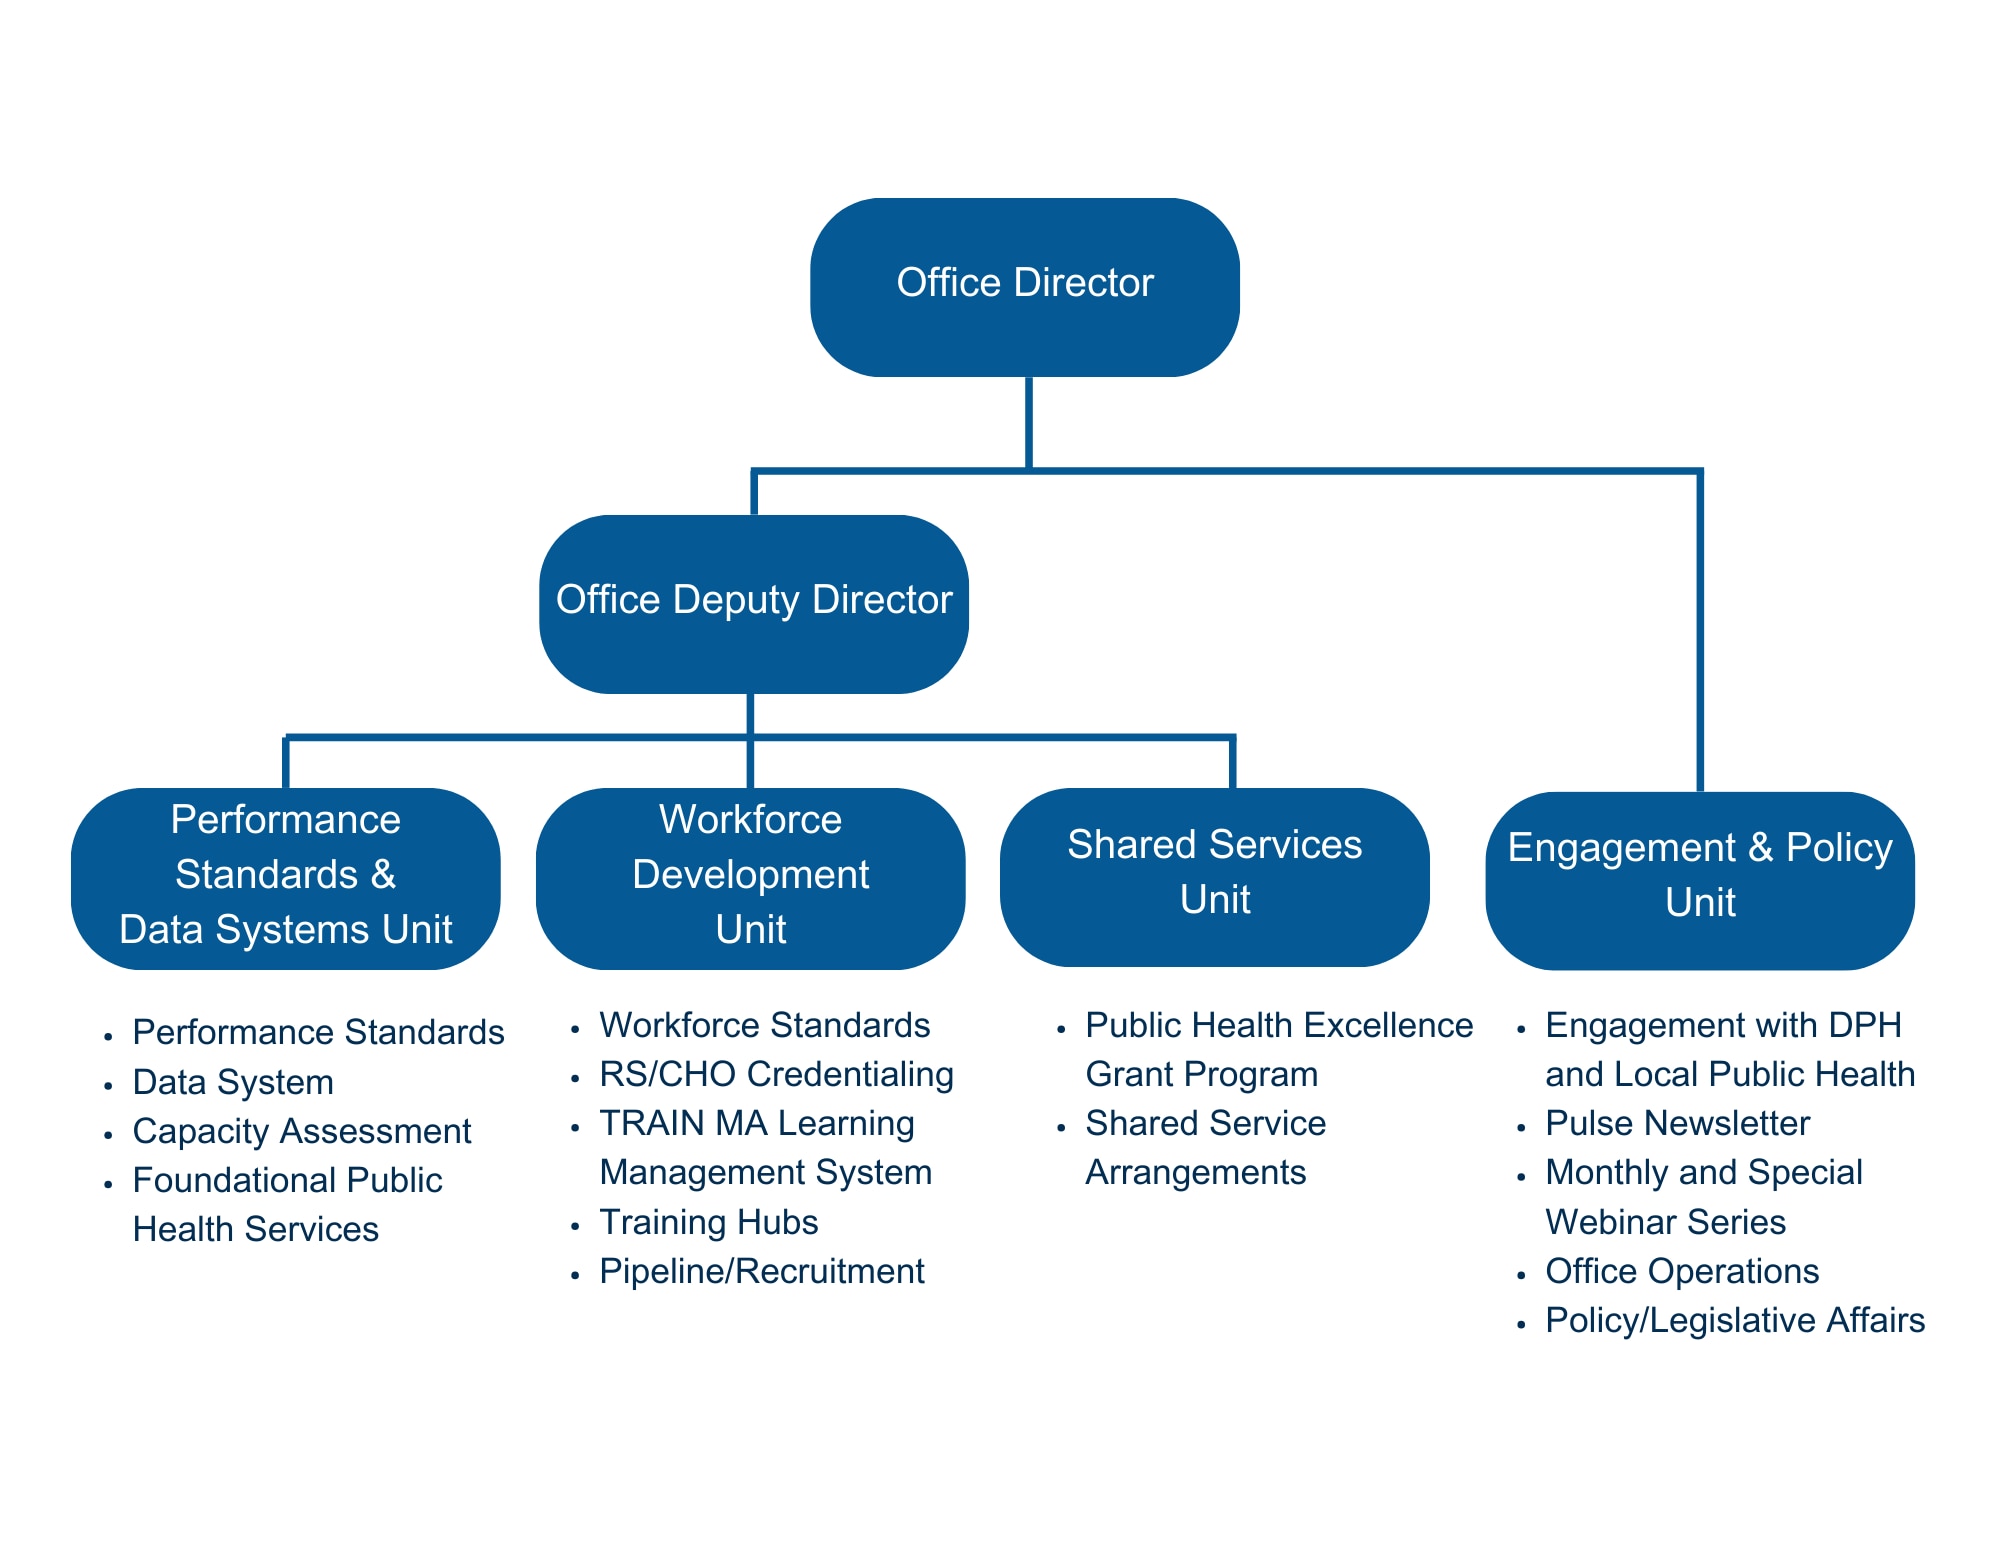 OLRH organizational chart. Top level is the Office Director; 2nd level is the Office Deputy Director; 3rd level under the Deputy Director is each OLRH Business Unit with their responsibilities -- Performance Standards & Data Unit, Workforce Development Unit, Shared Services Unit. A 2nd level under the Office Director is the Engagement & Policy Unit.